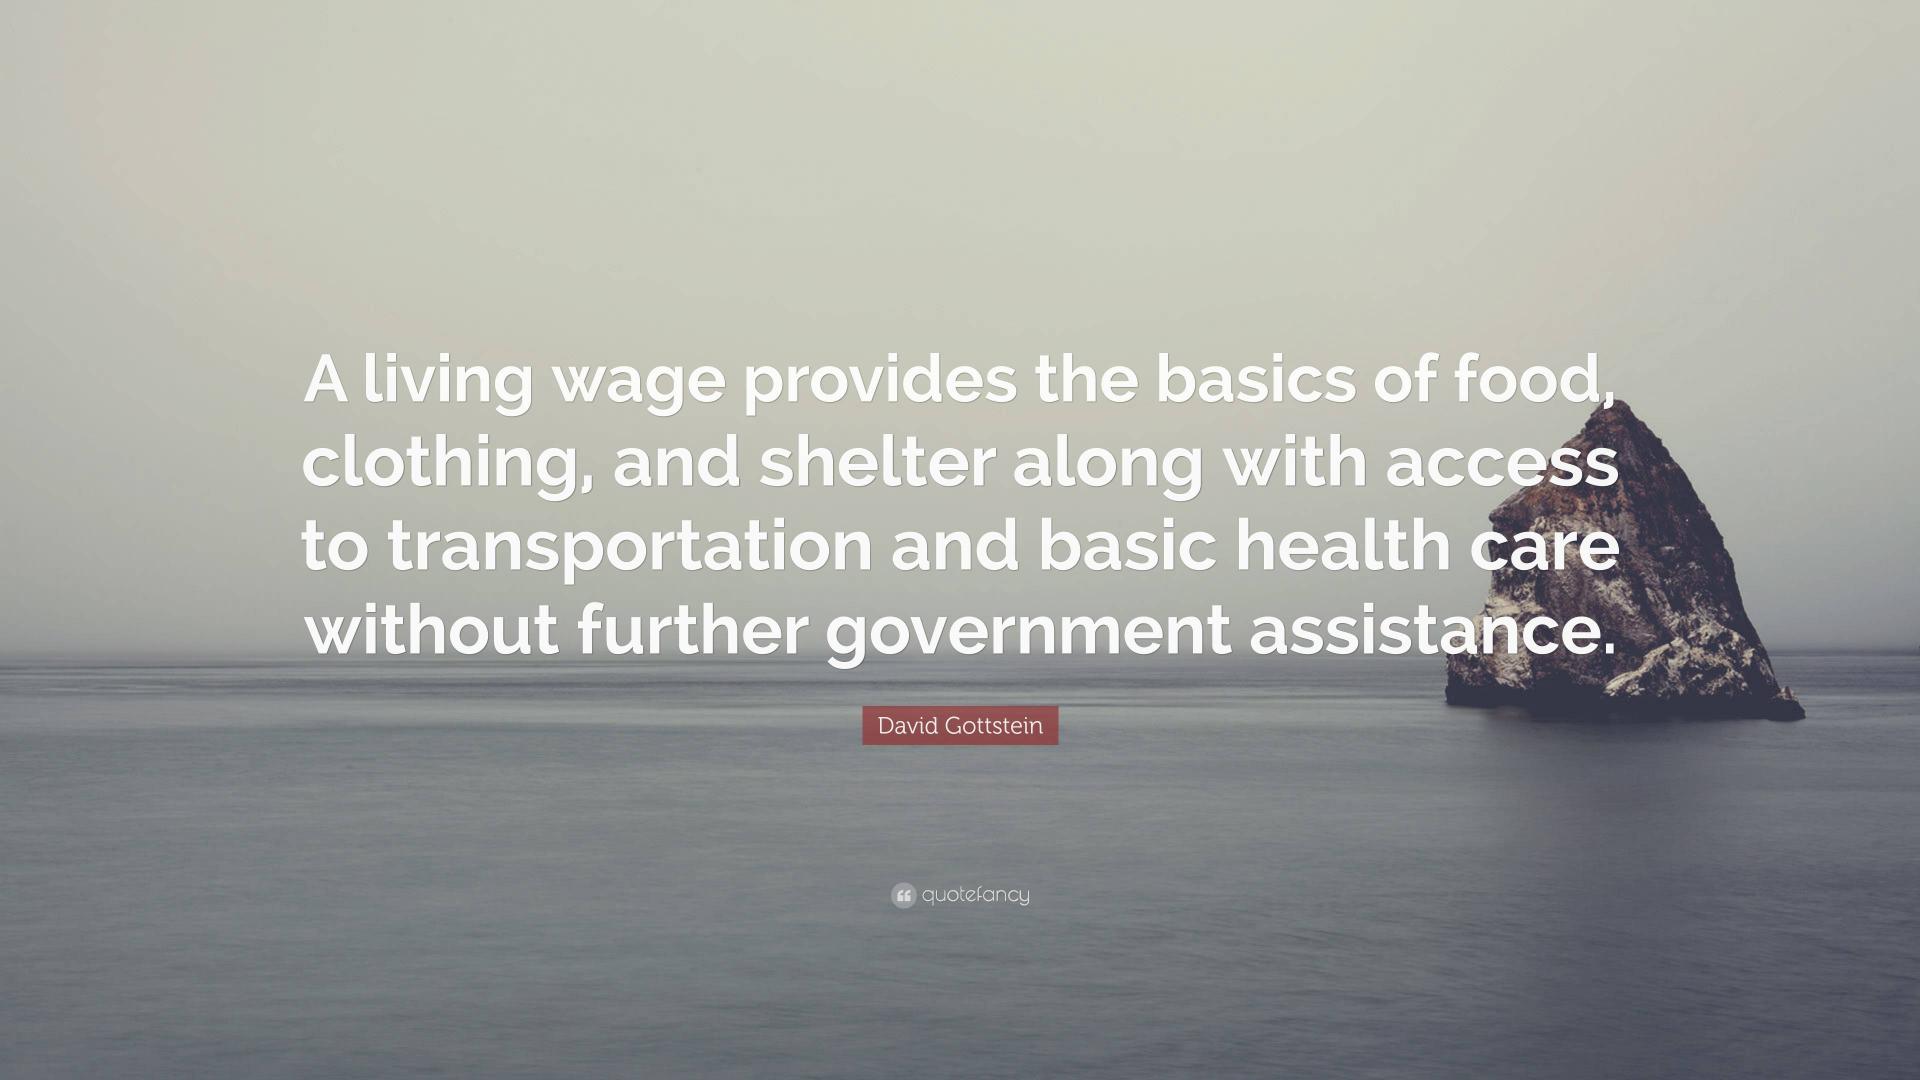 7632318 david gottstein quote a living wage provides the basics of food